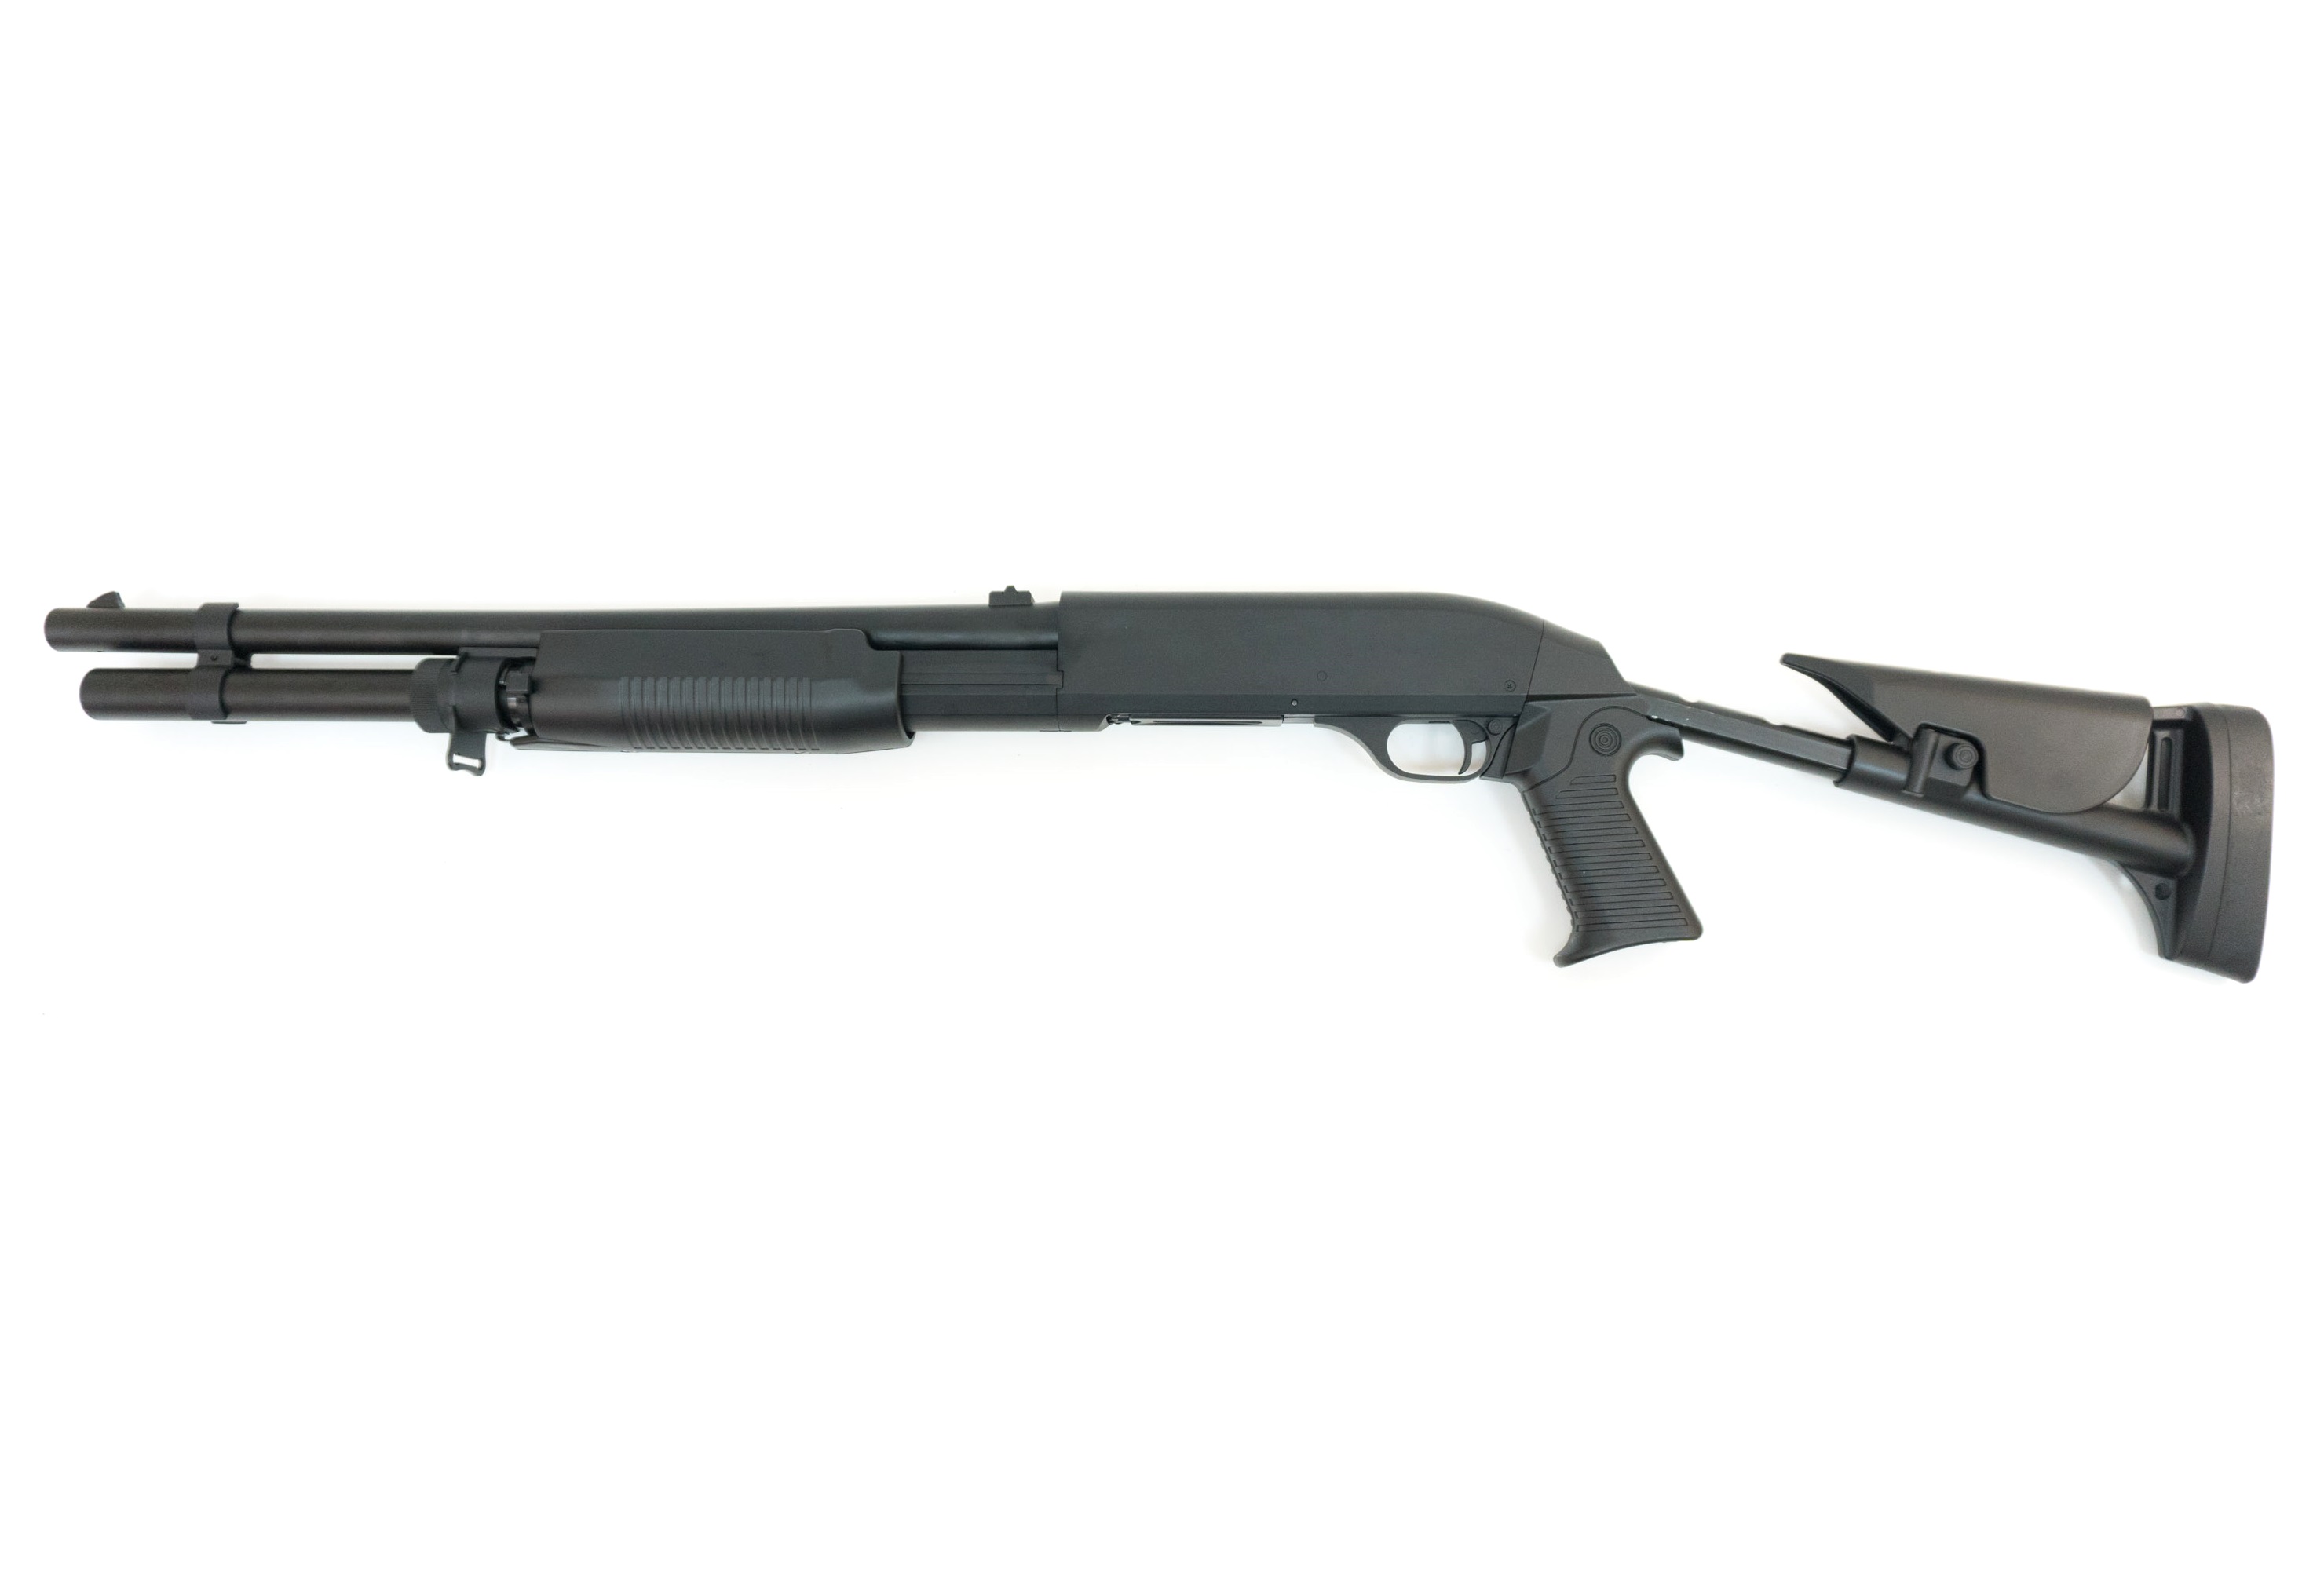 O d 1 4. Ружье Benelli m3 s90. Ружье Benelli m3 super 90. Benelli m3 super 90 Telescopic. Benelli m4 super 90.